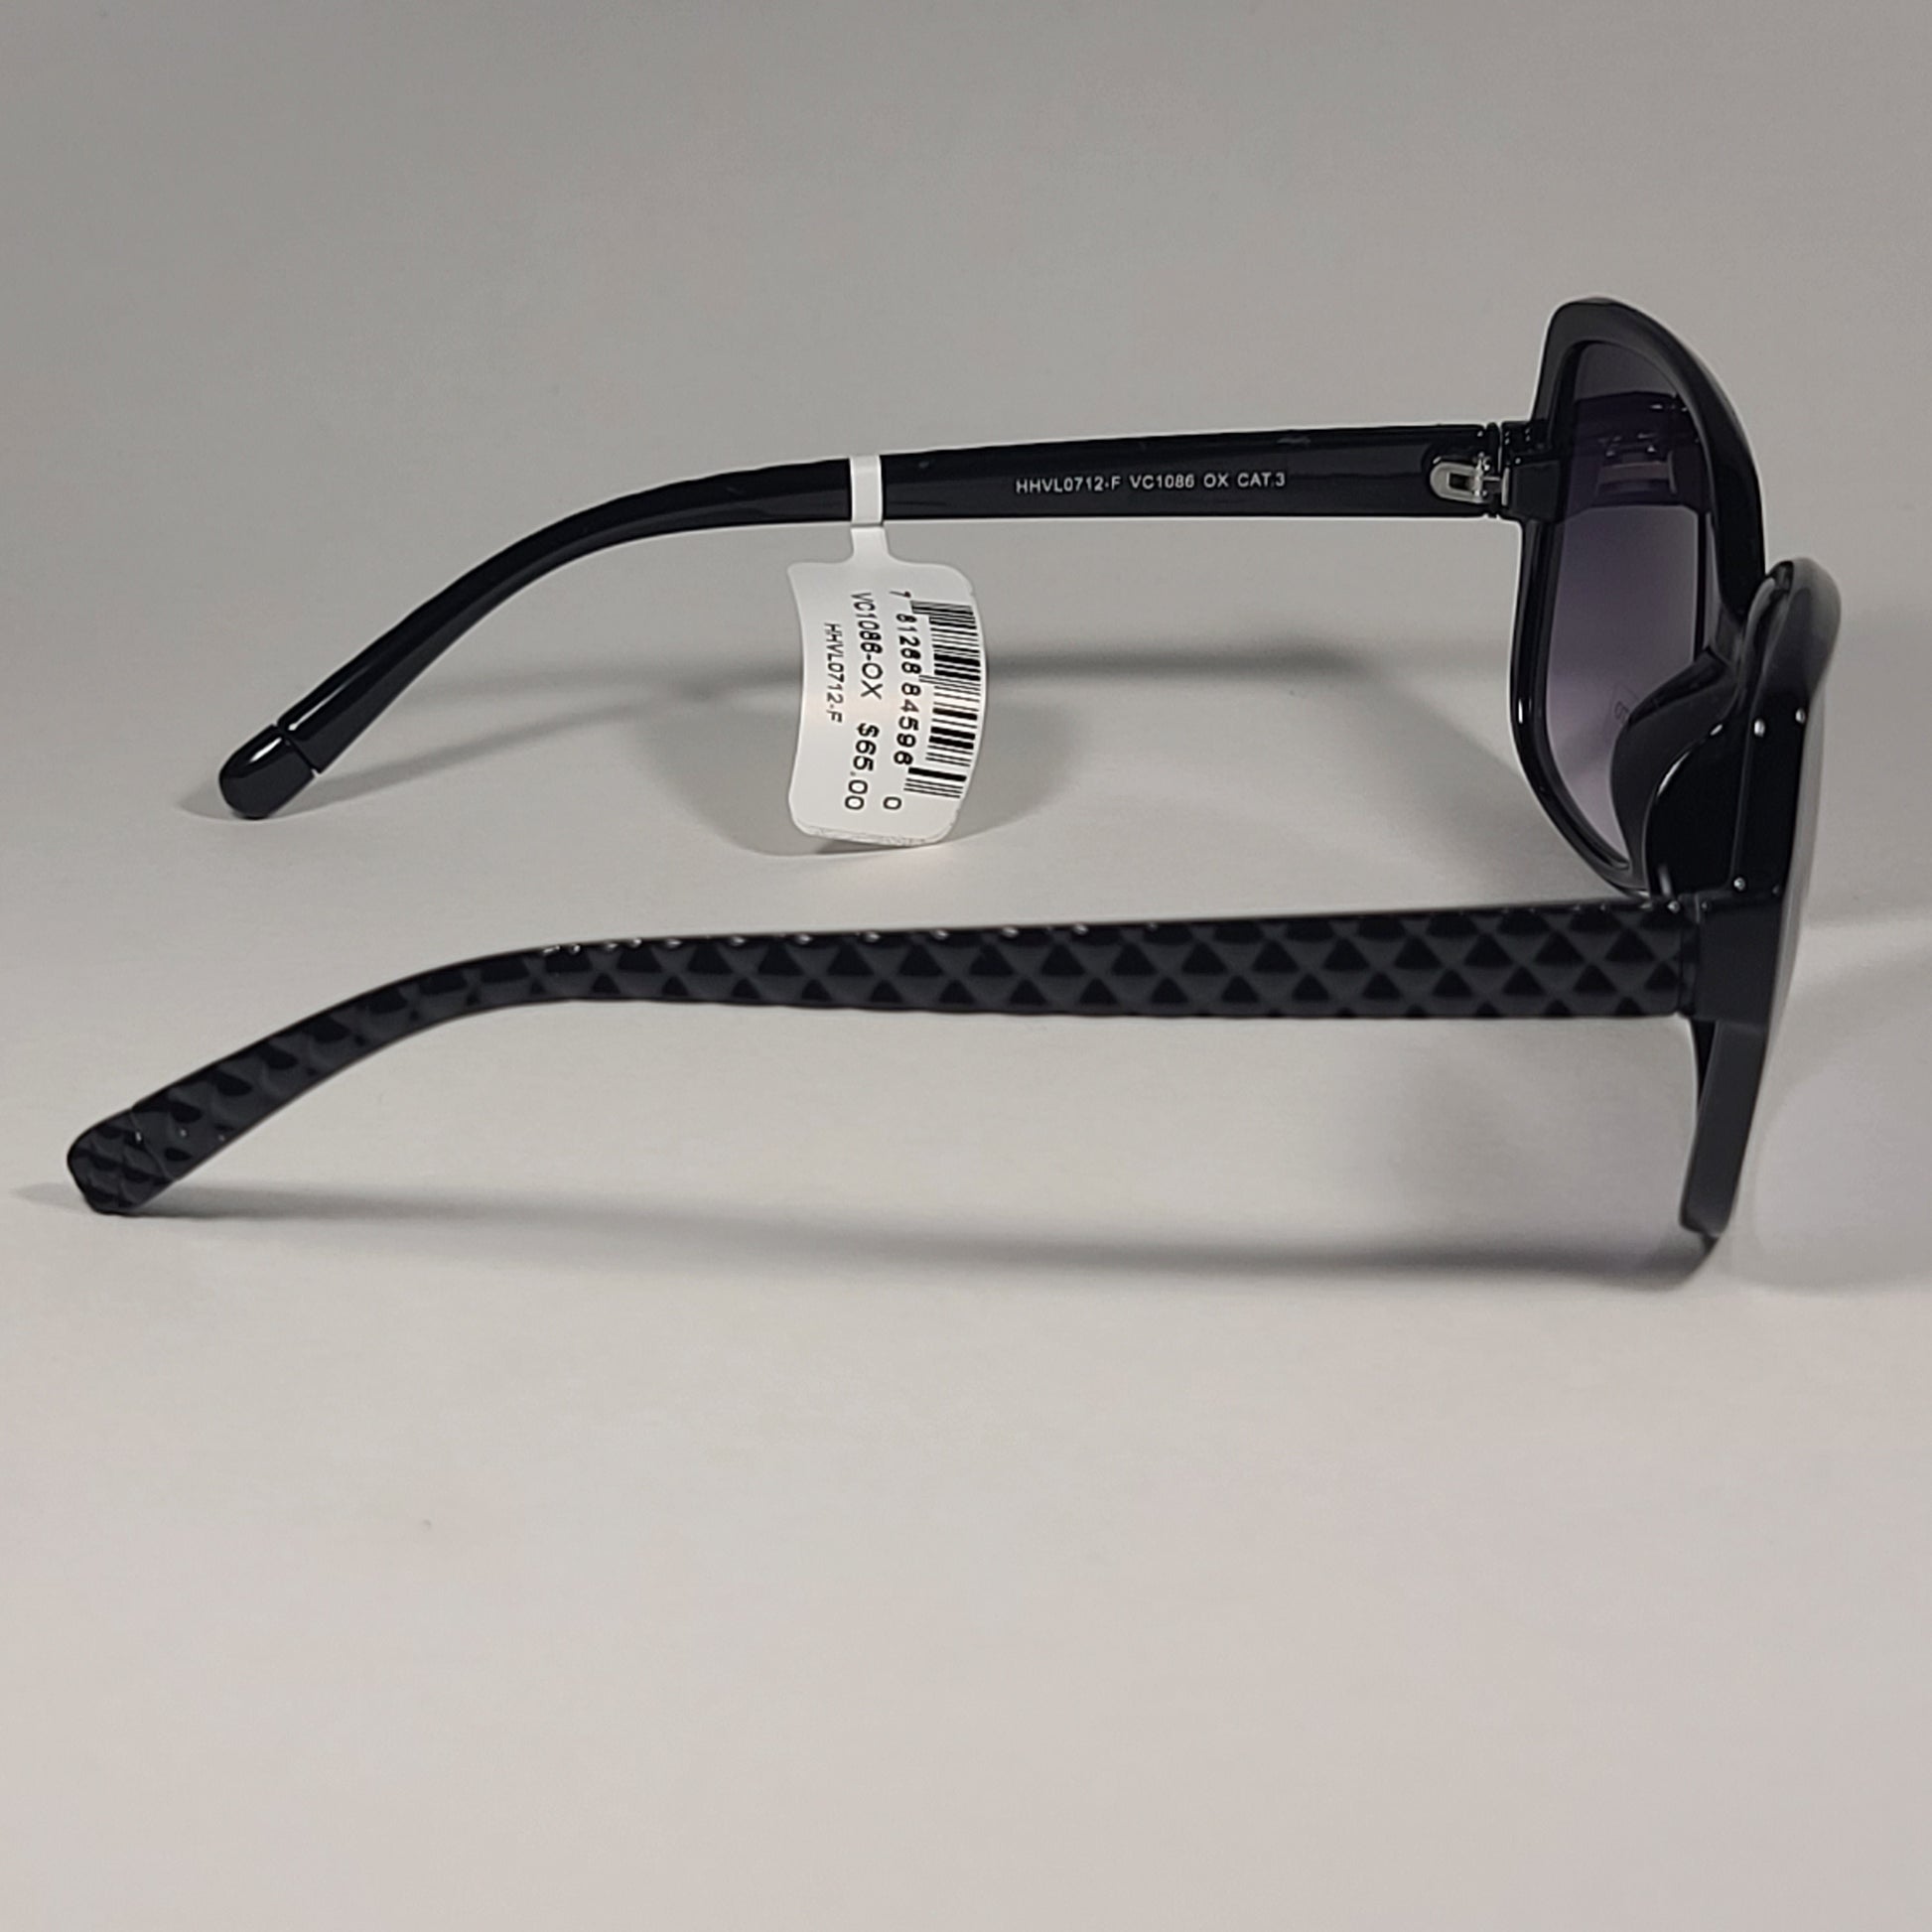 Vince Camuto VC1086 OX Butterfly Sunglasses Black Frame Smoke Gradient Lens - Sunglasses